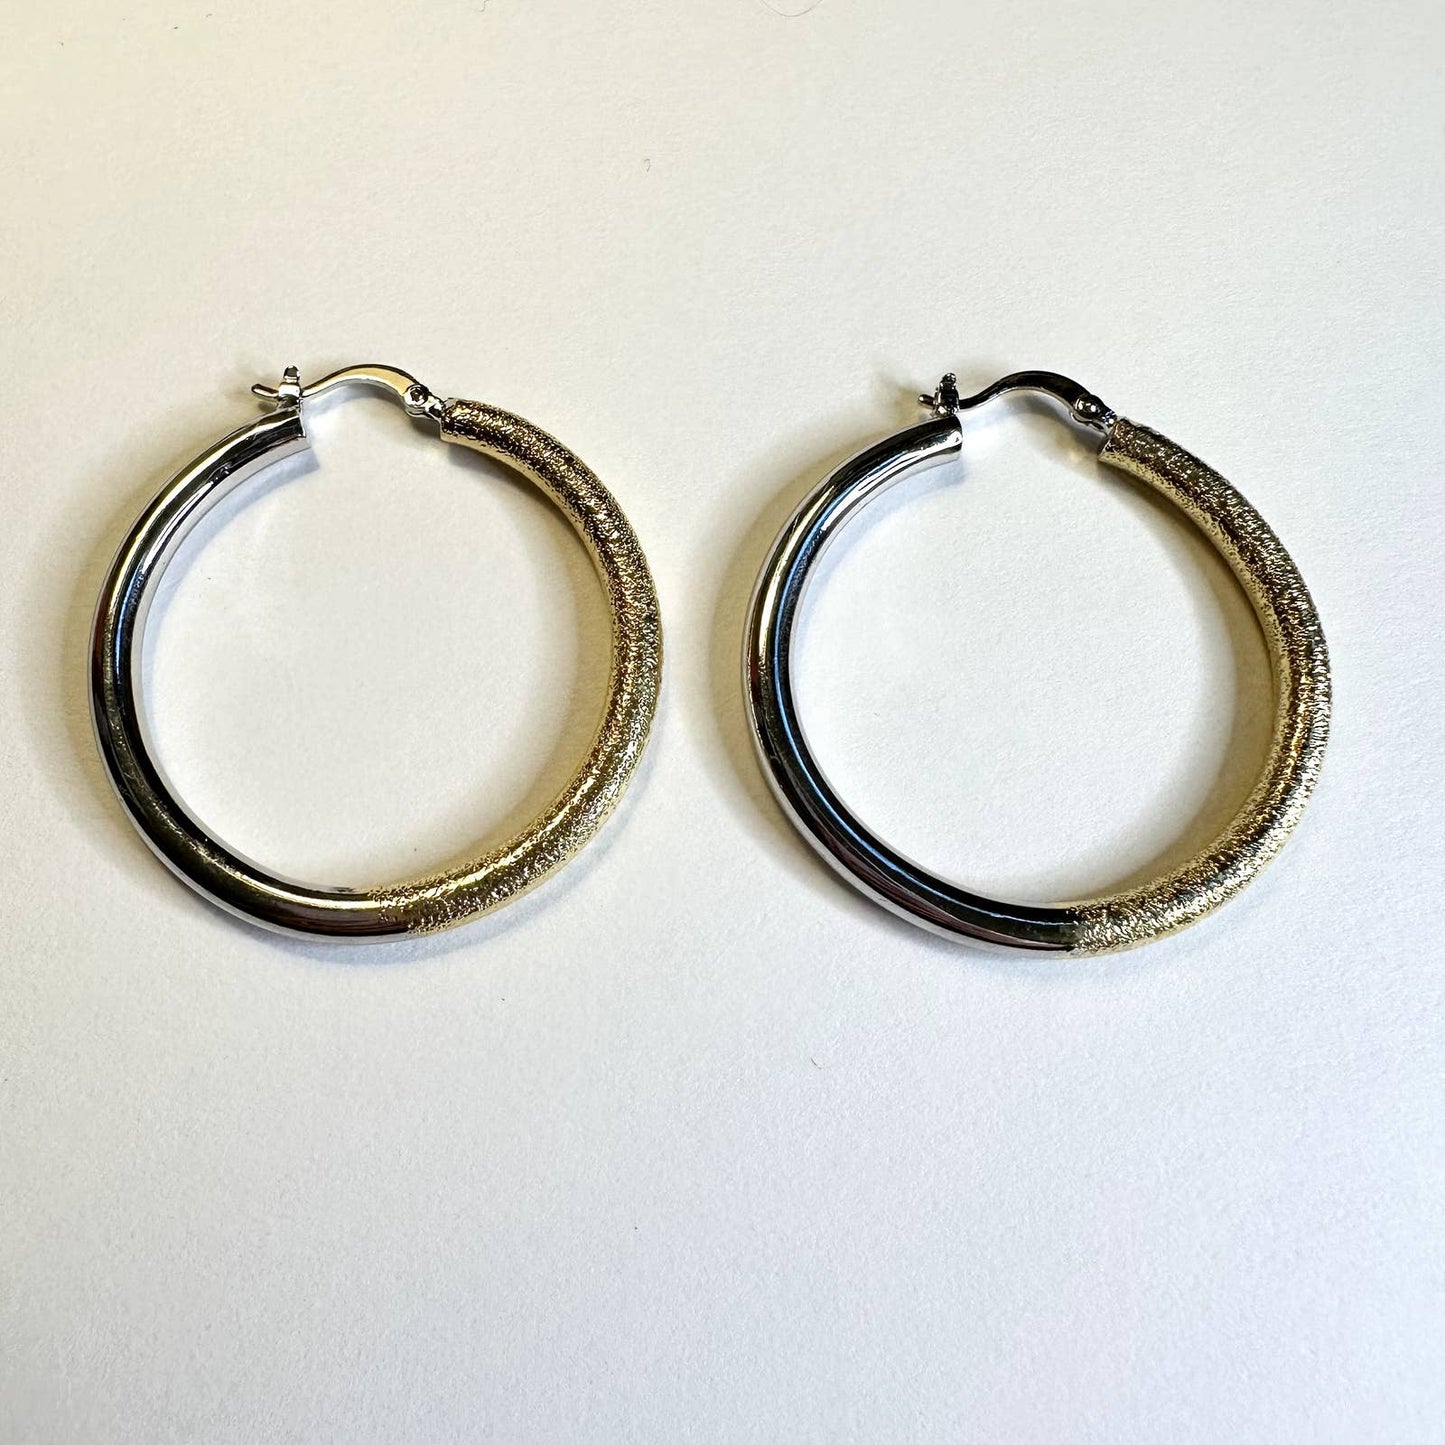 Textured gold smooth silver thick hoop earrings